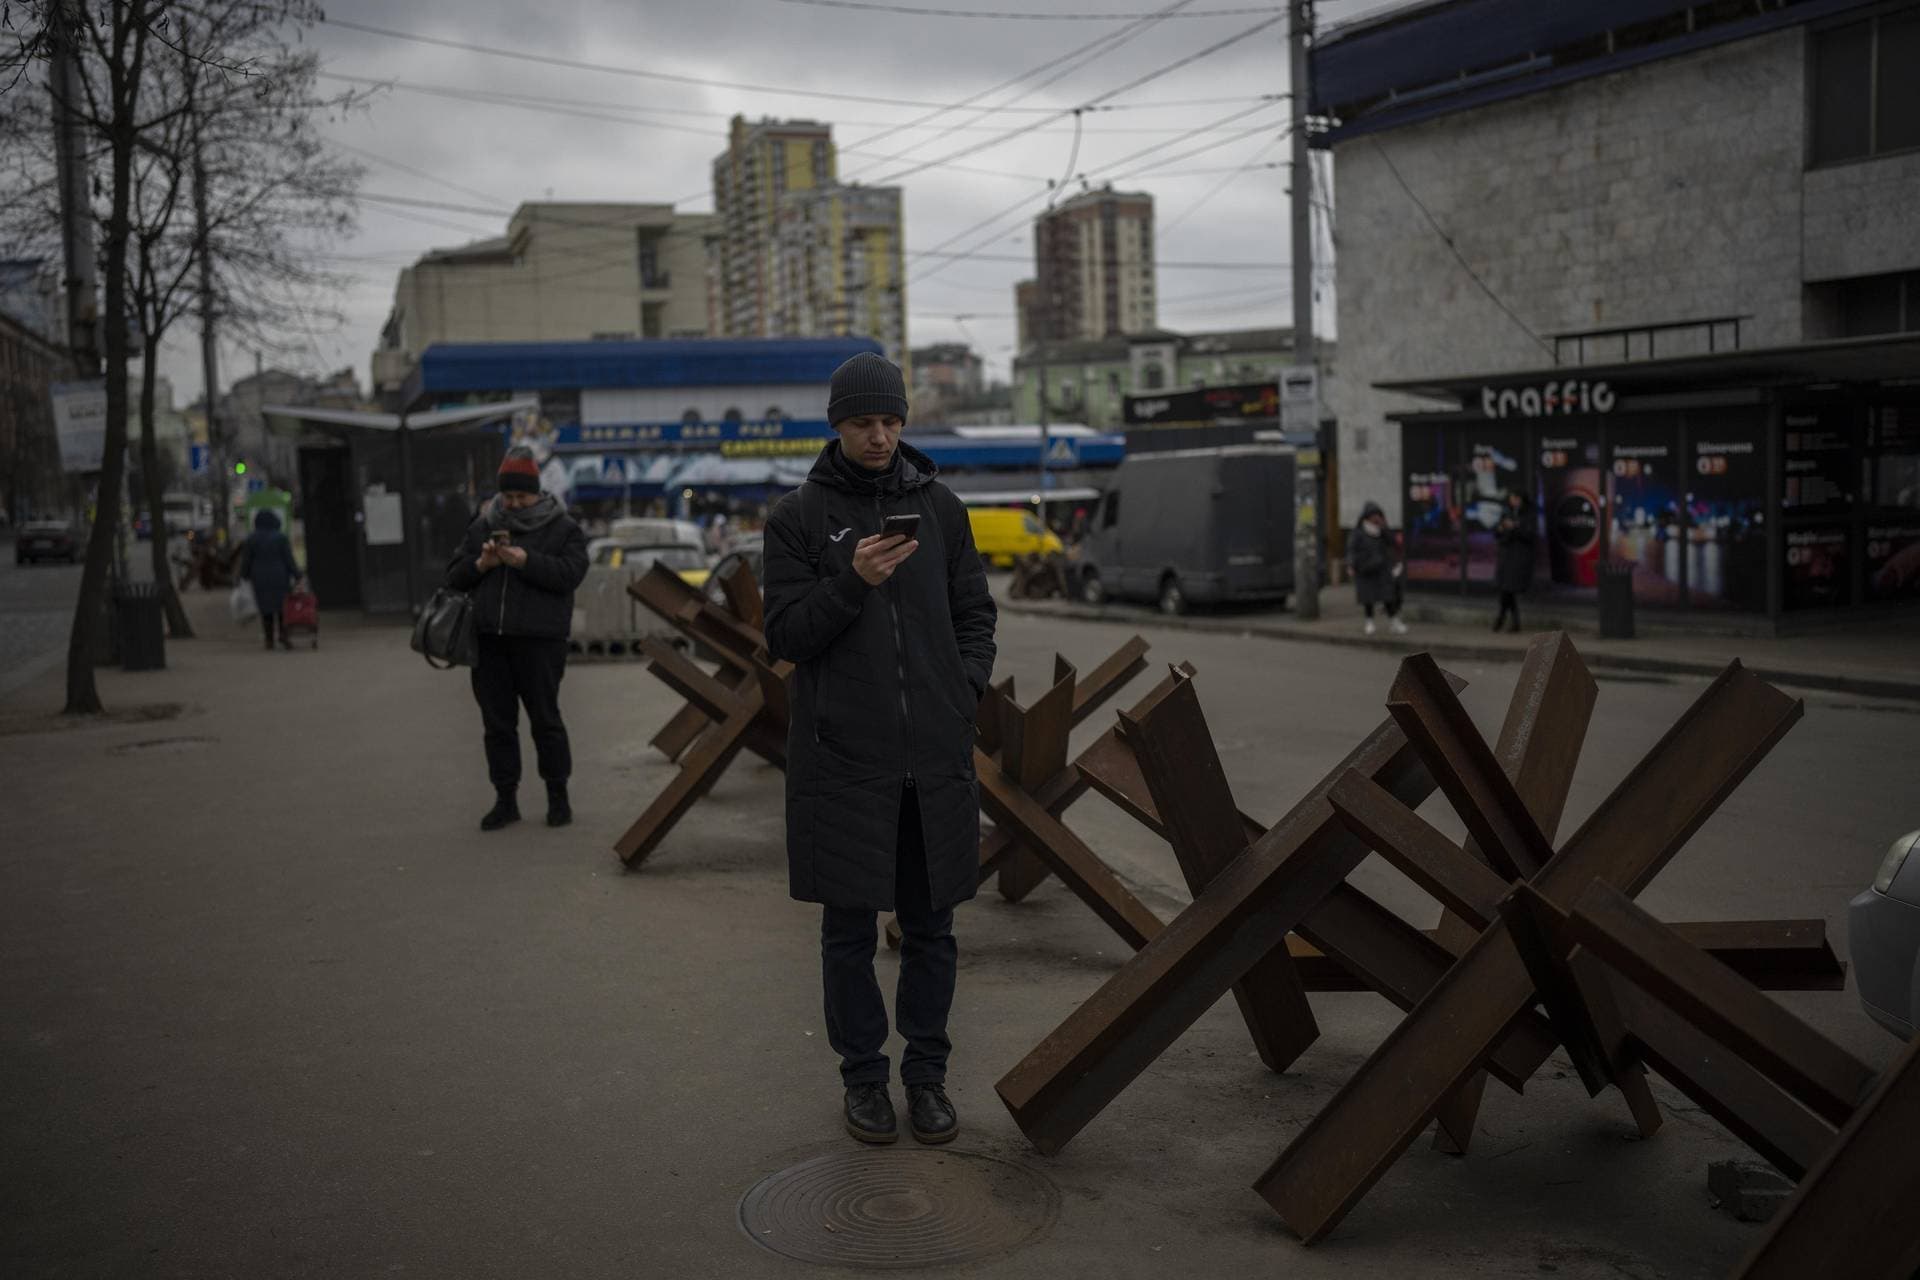 People wait for a bus to arrive in Kyiv